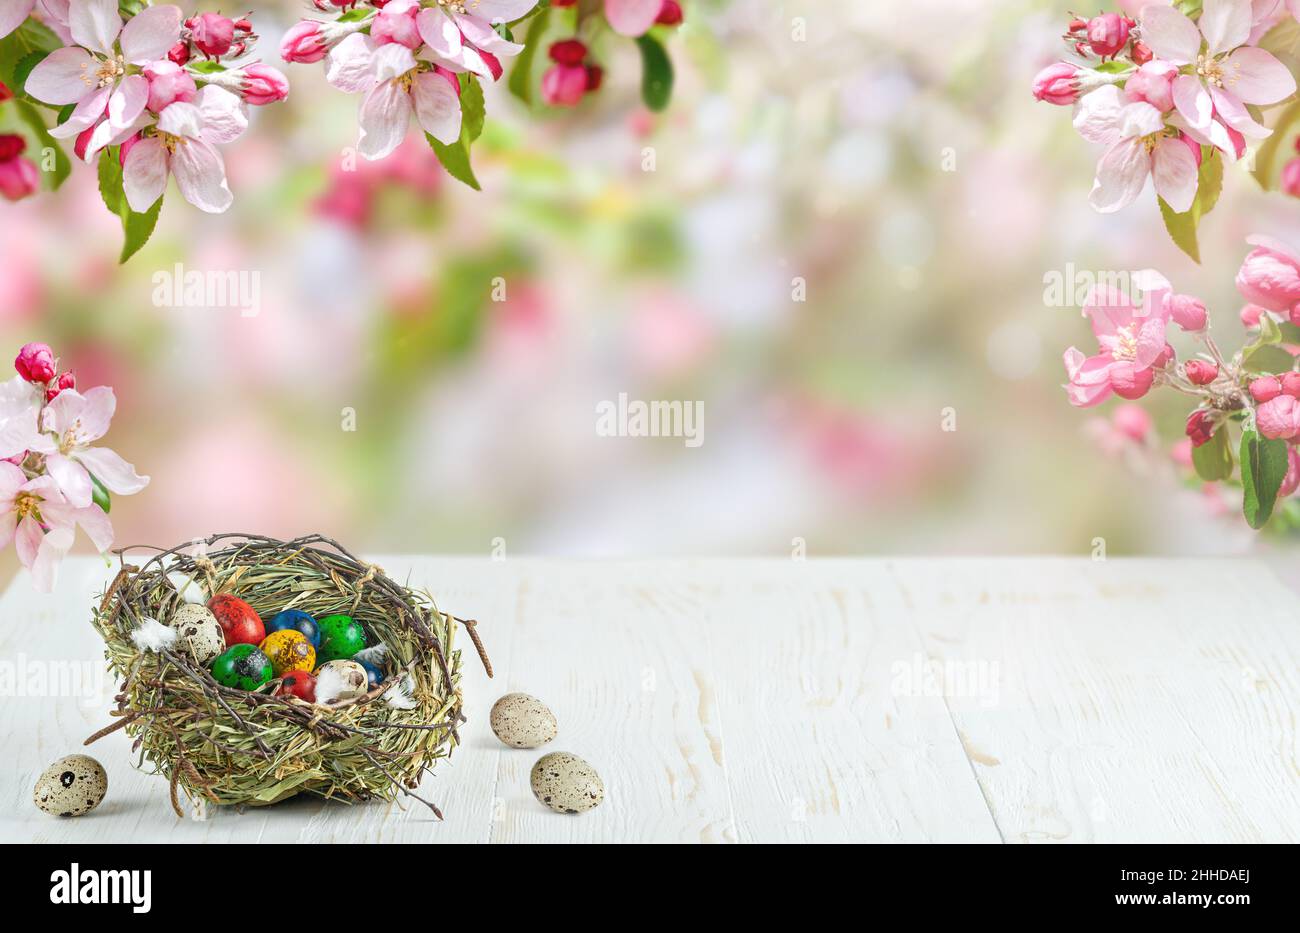 Colorful quail Easter eggs in nest on white wooden table on blurred floral bakground. Copy space Stock Photo